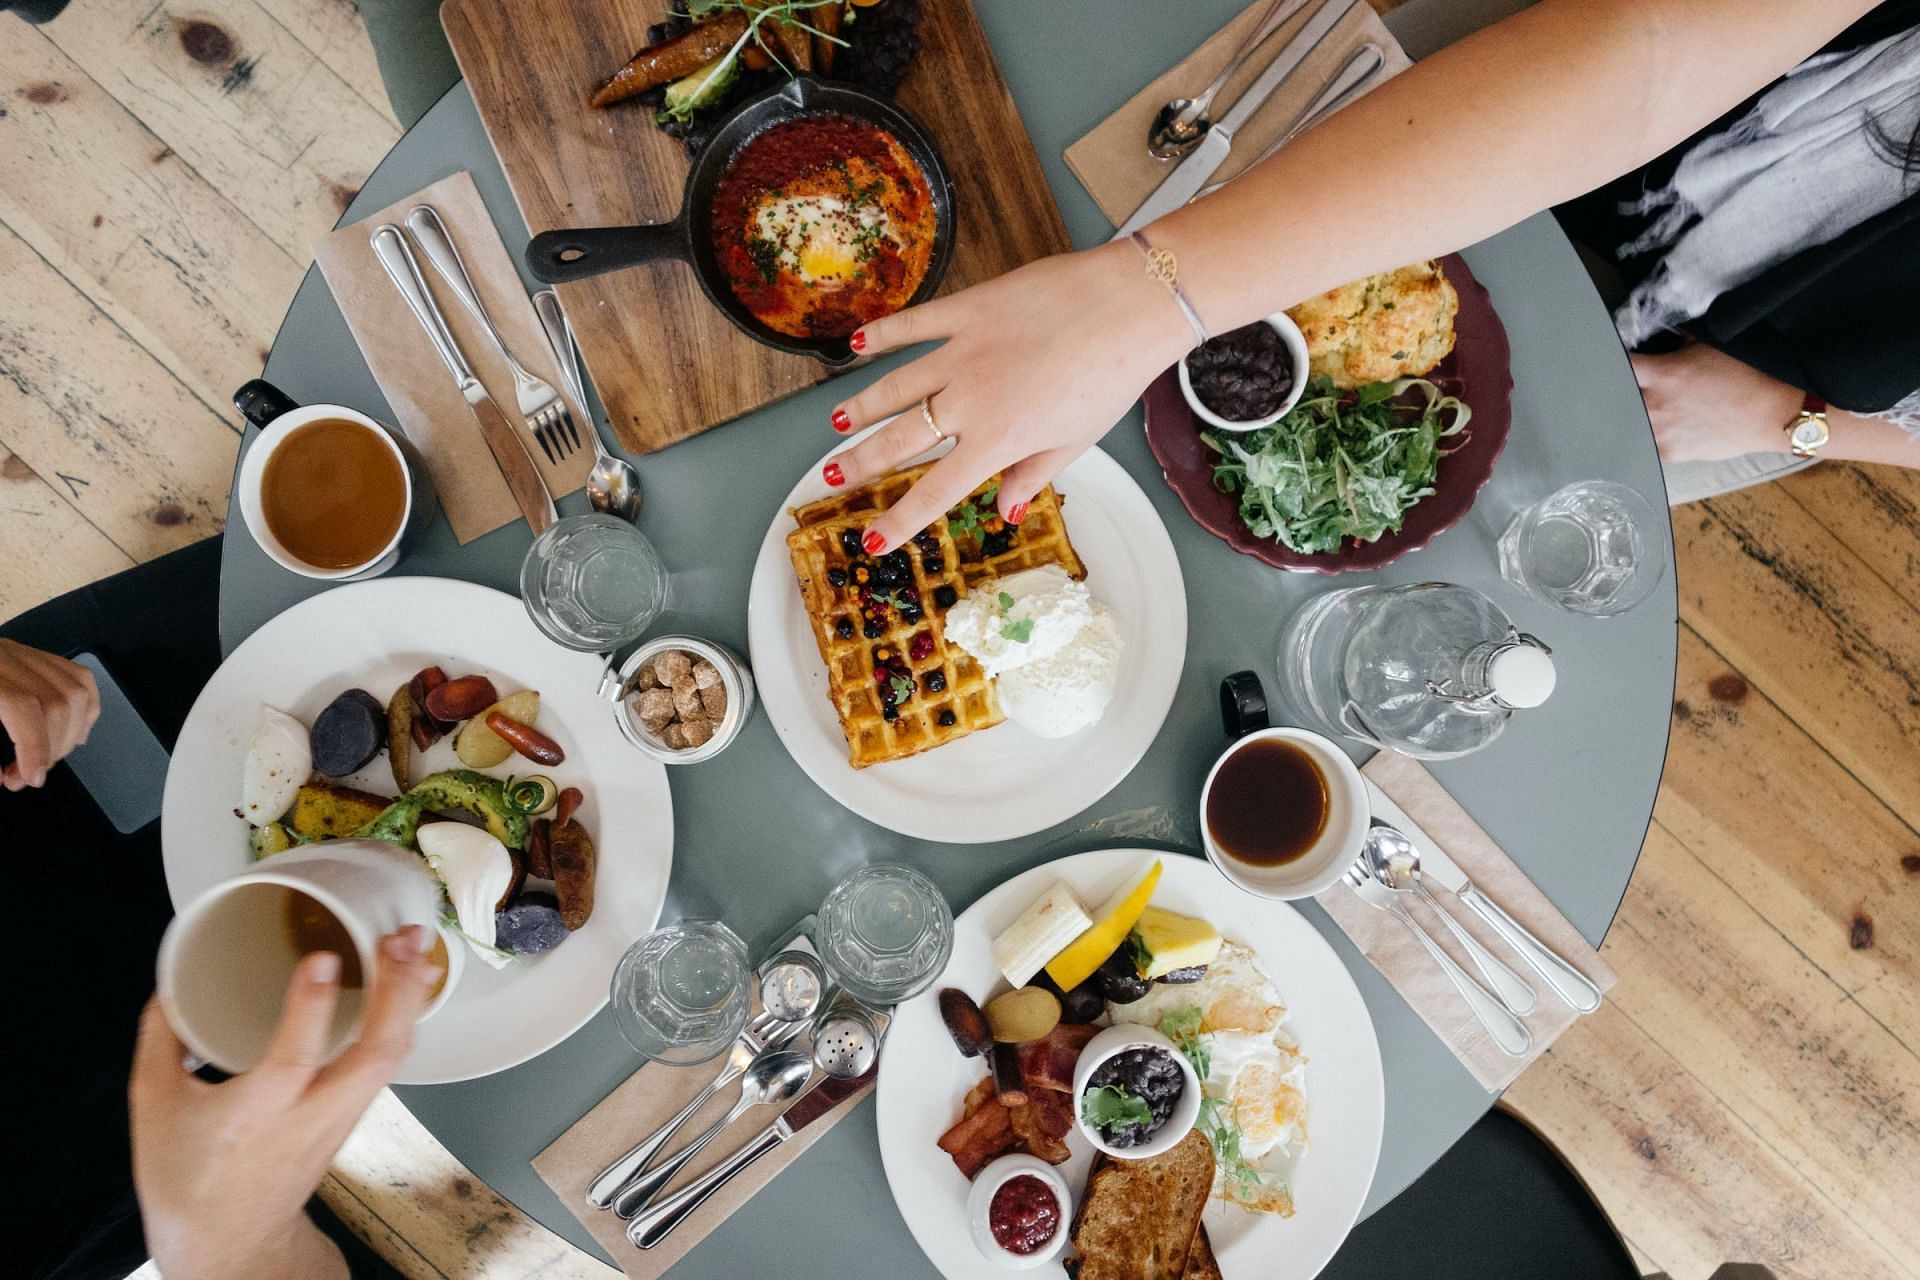 There is no fixed diagnosis for addiction to food (Image via Unsplash/Ali Inay)